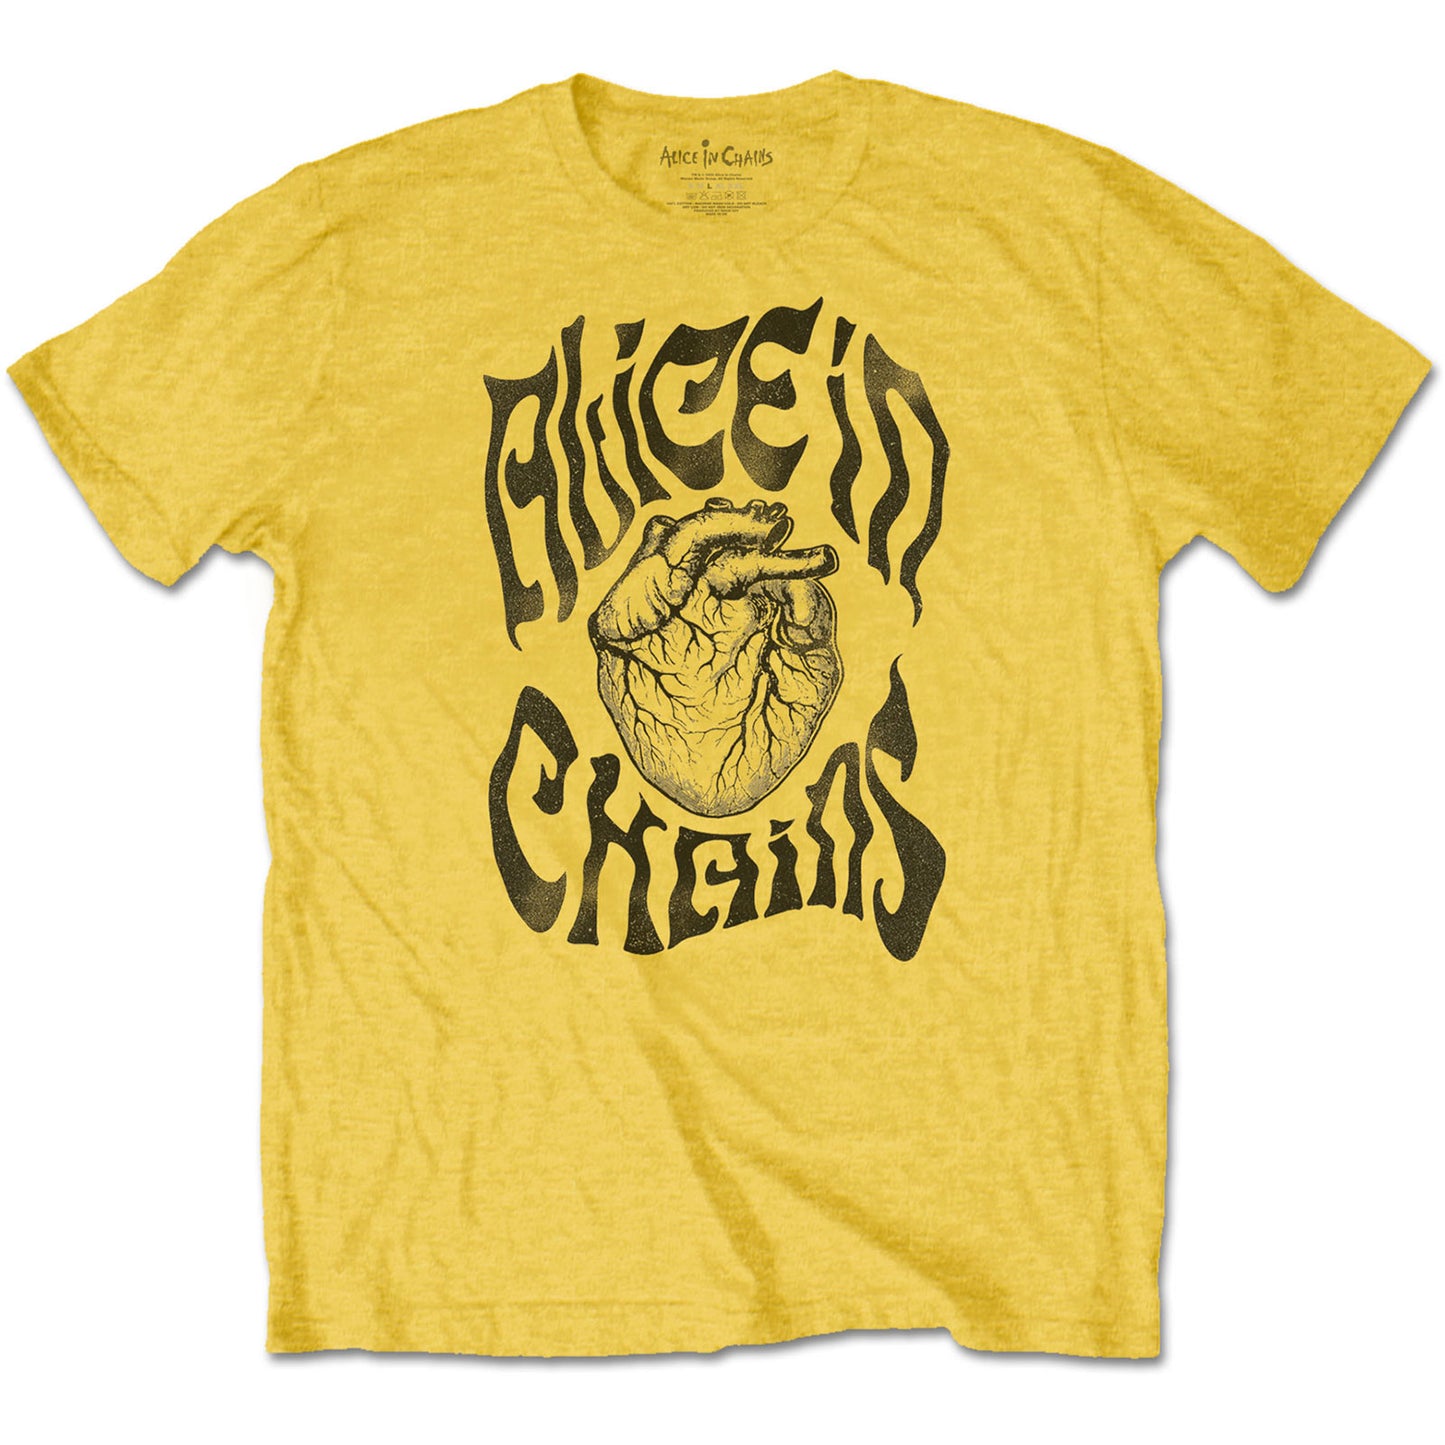 ALICE IN CHAINS UNISEX T-SHIRT: TRANSPLANT